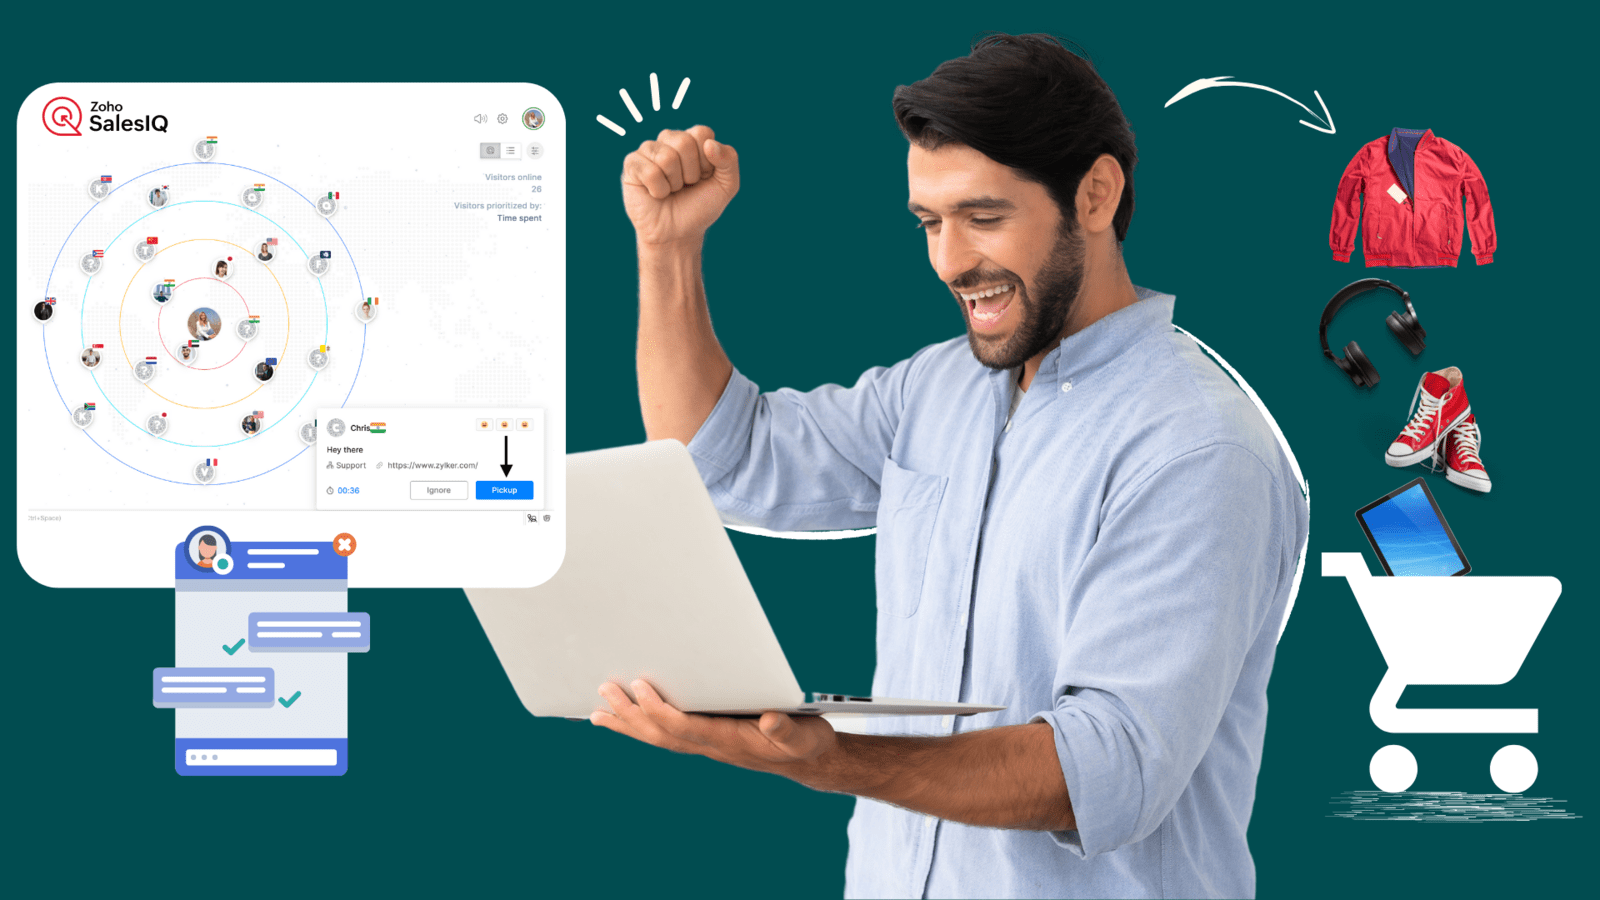 Zoho Sales IQ | Live Chat Support Software | Zoho Partner